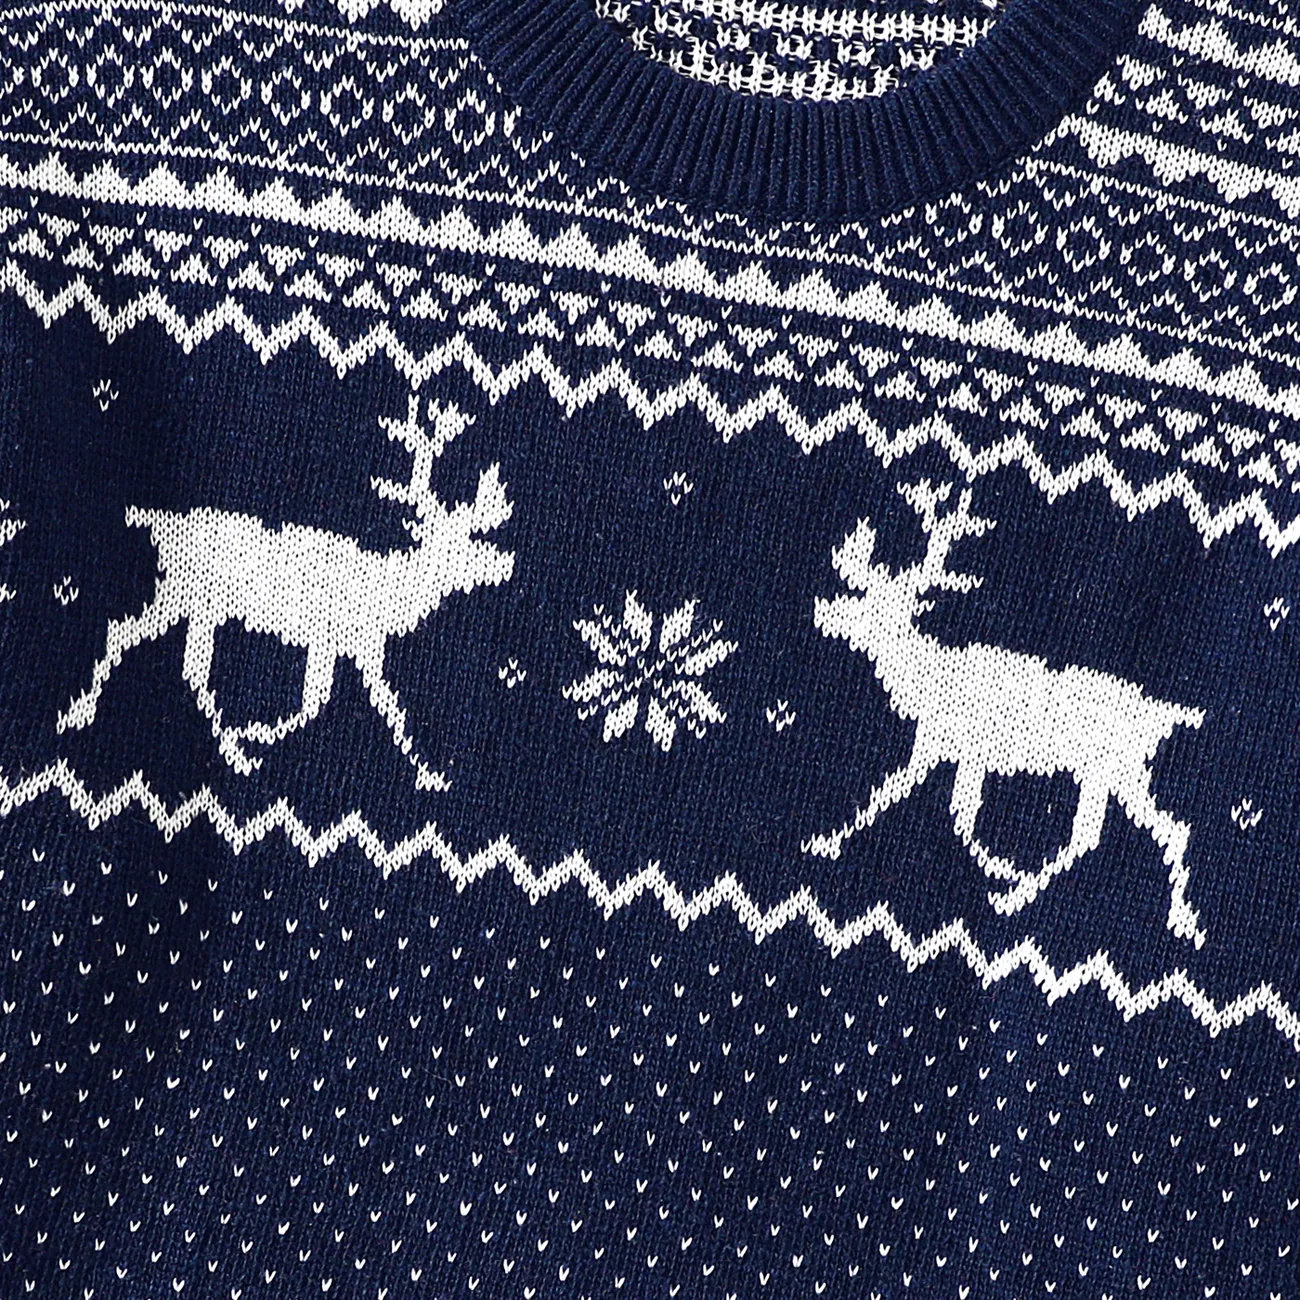 Christmas Family Matching Deer Graphic Long-sleeve Knitted Sweater Multi-color big image 1